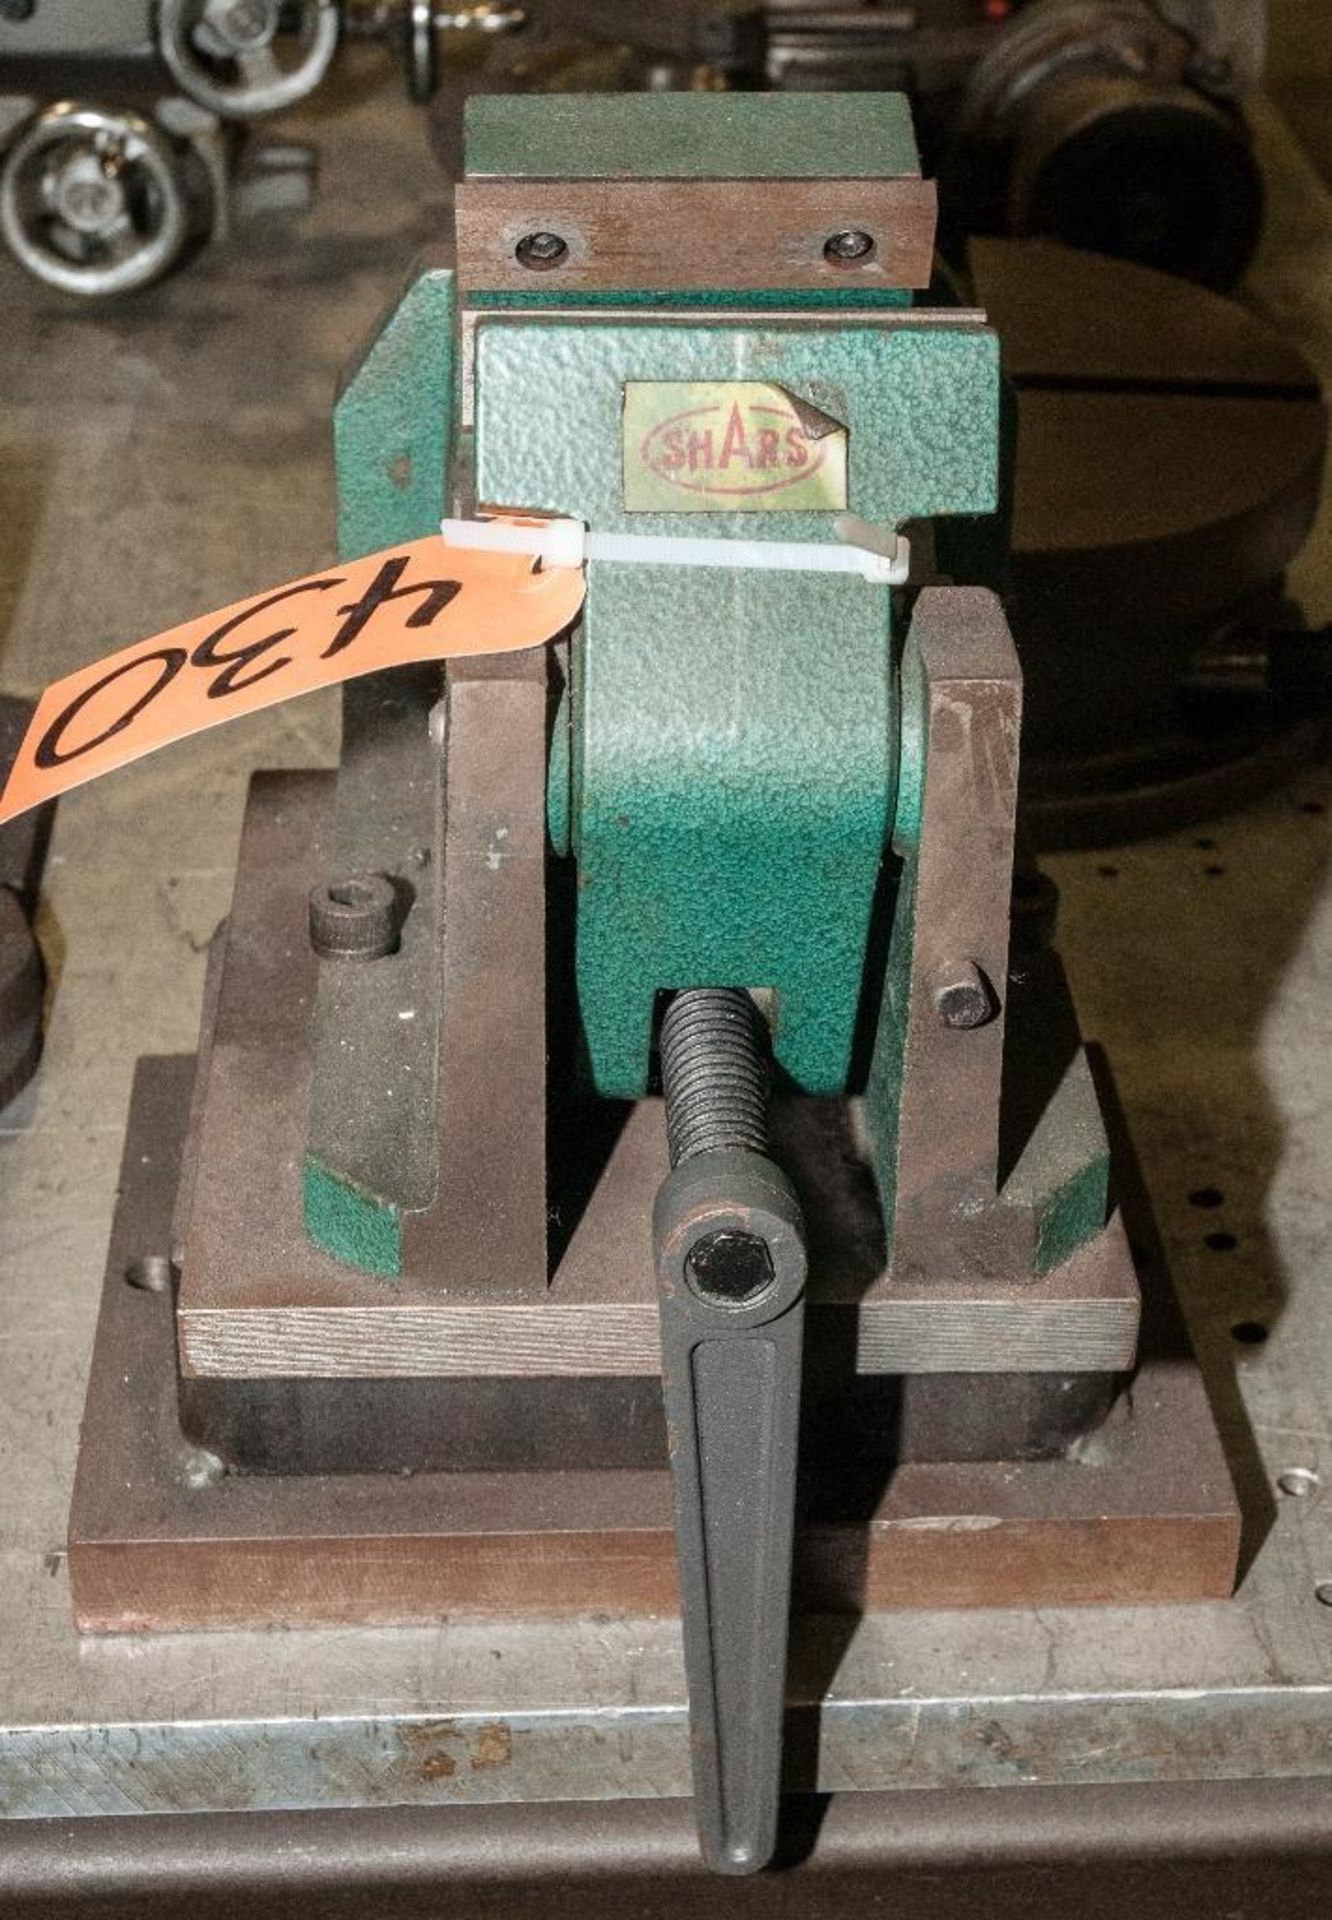 Shars Vise for round stock/pipe, LOCATED-United Tool N27 W23591 Paul Road Pewaukee, WI 53072 - Image 2 of 2